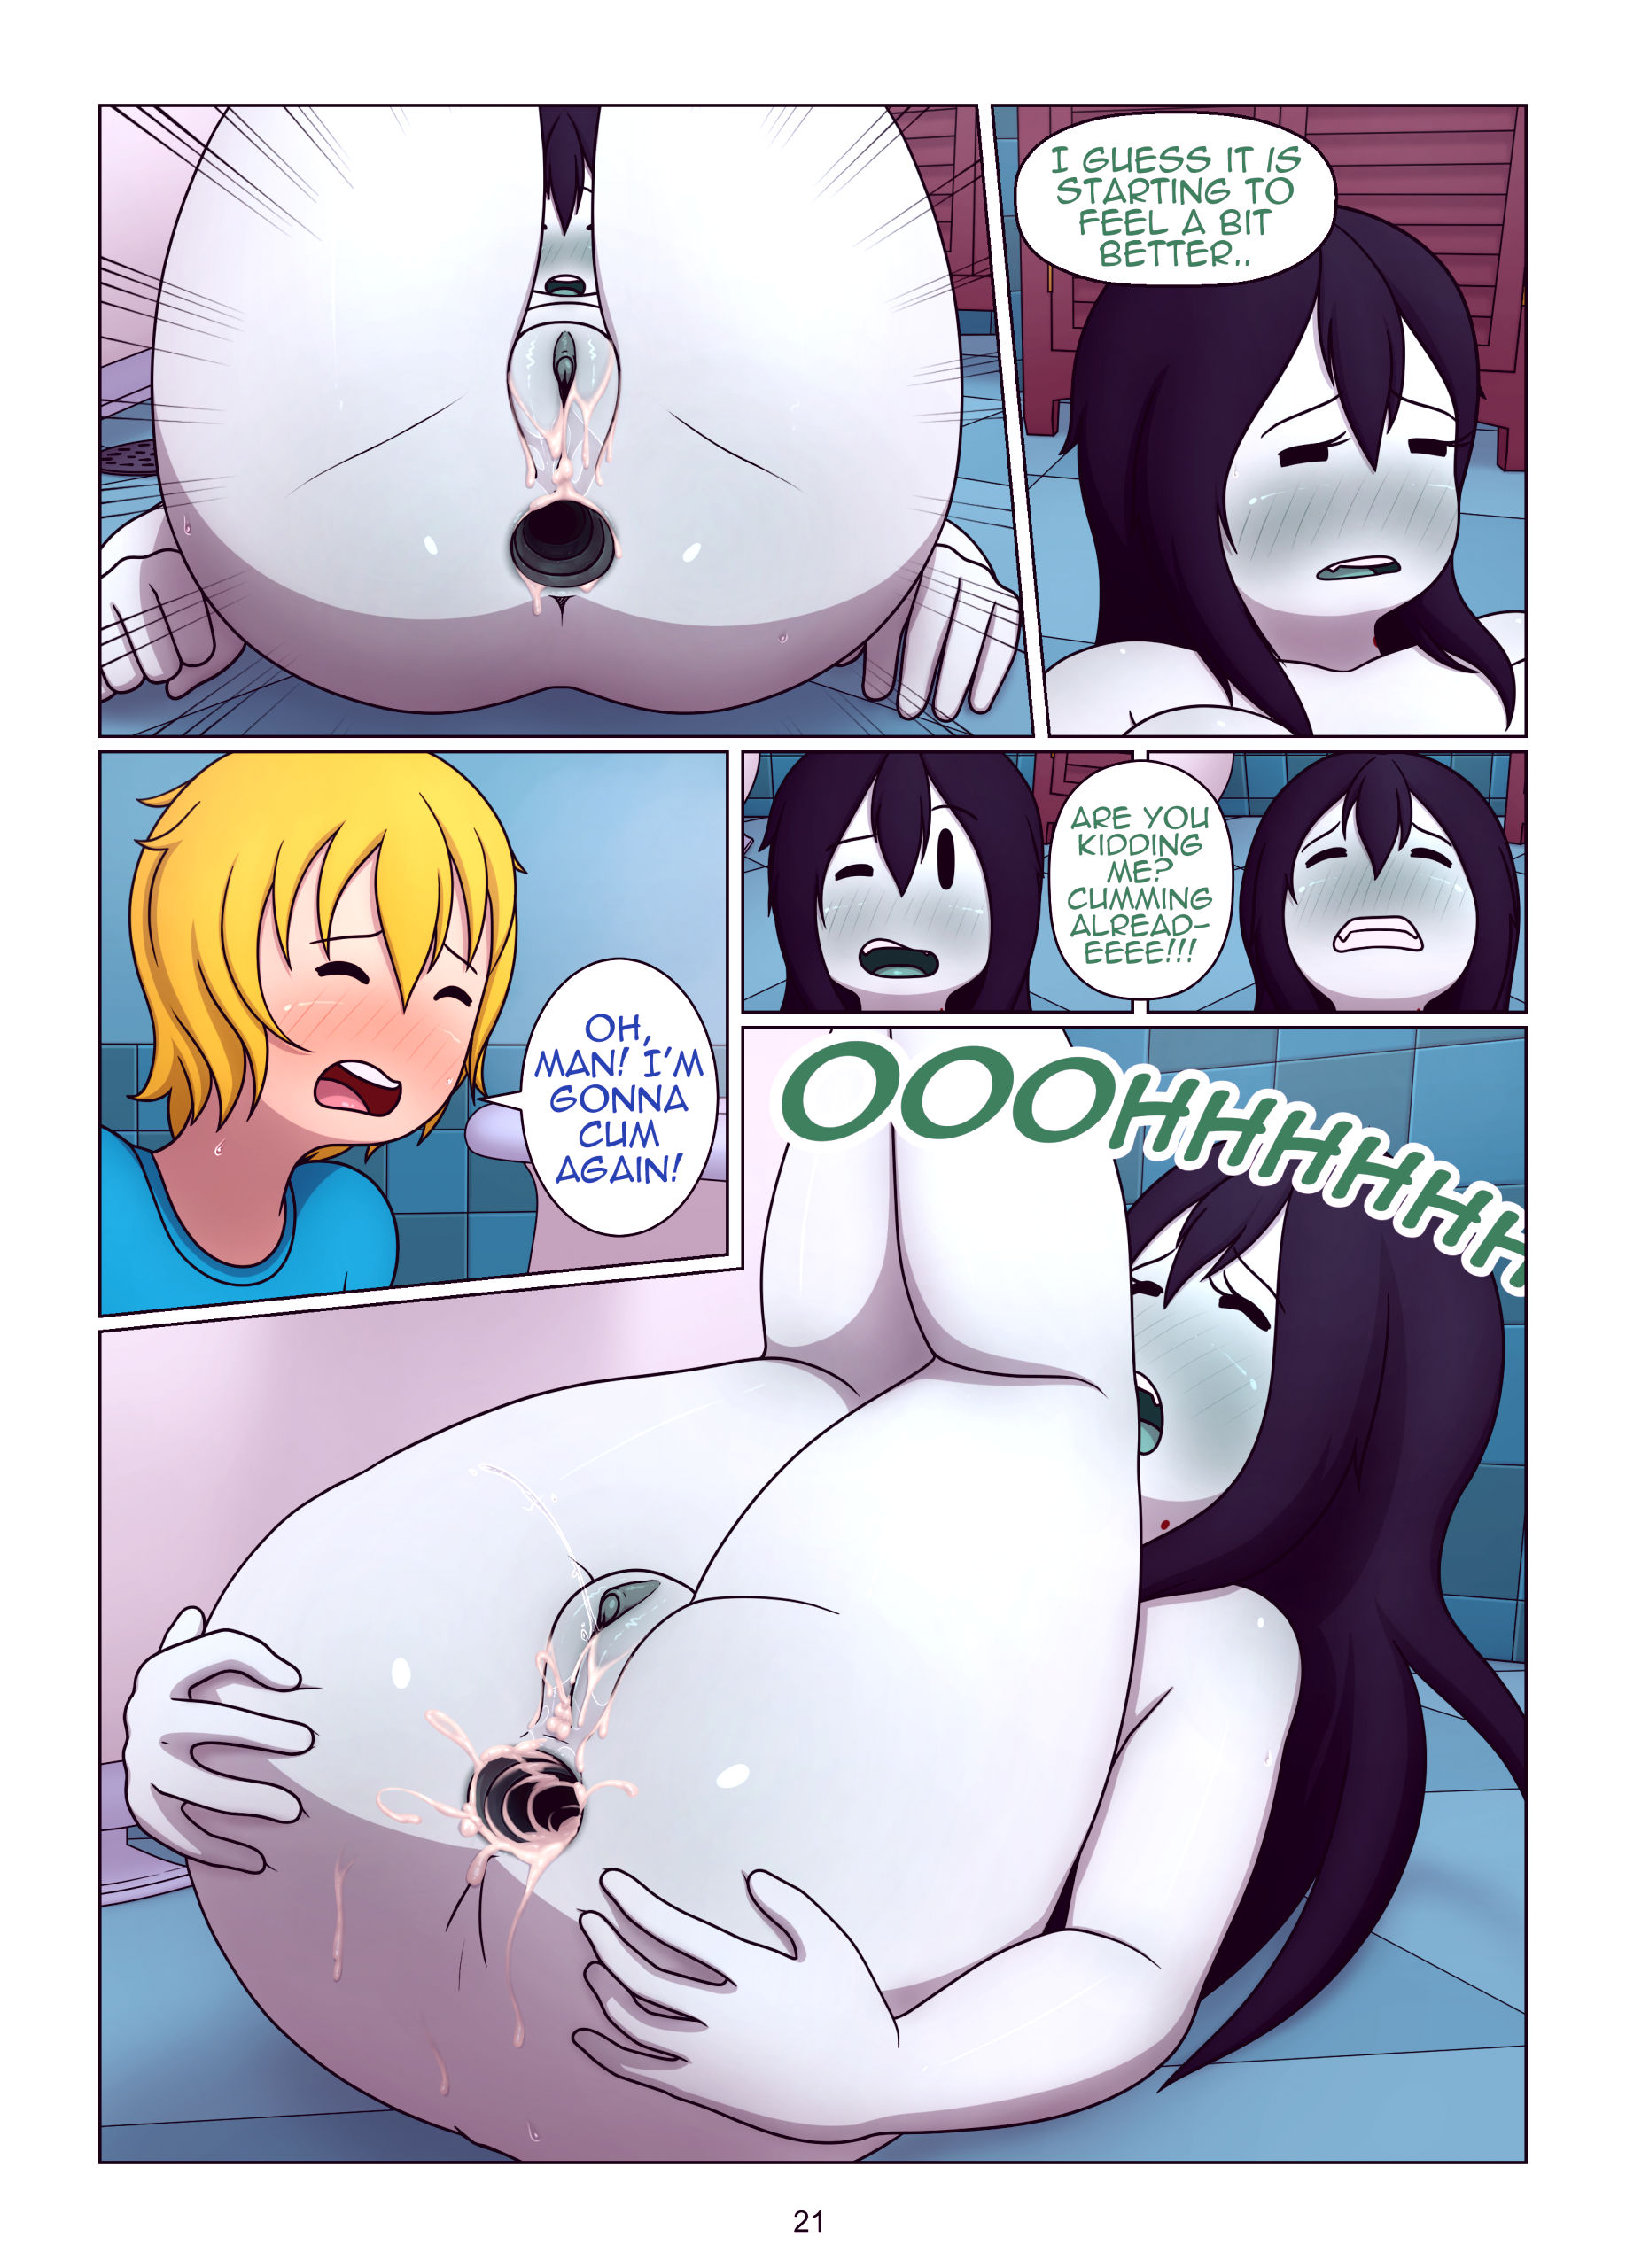 Misadventure time the collection porn comic picture 22